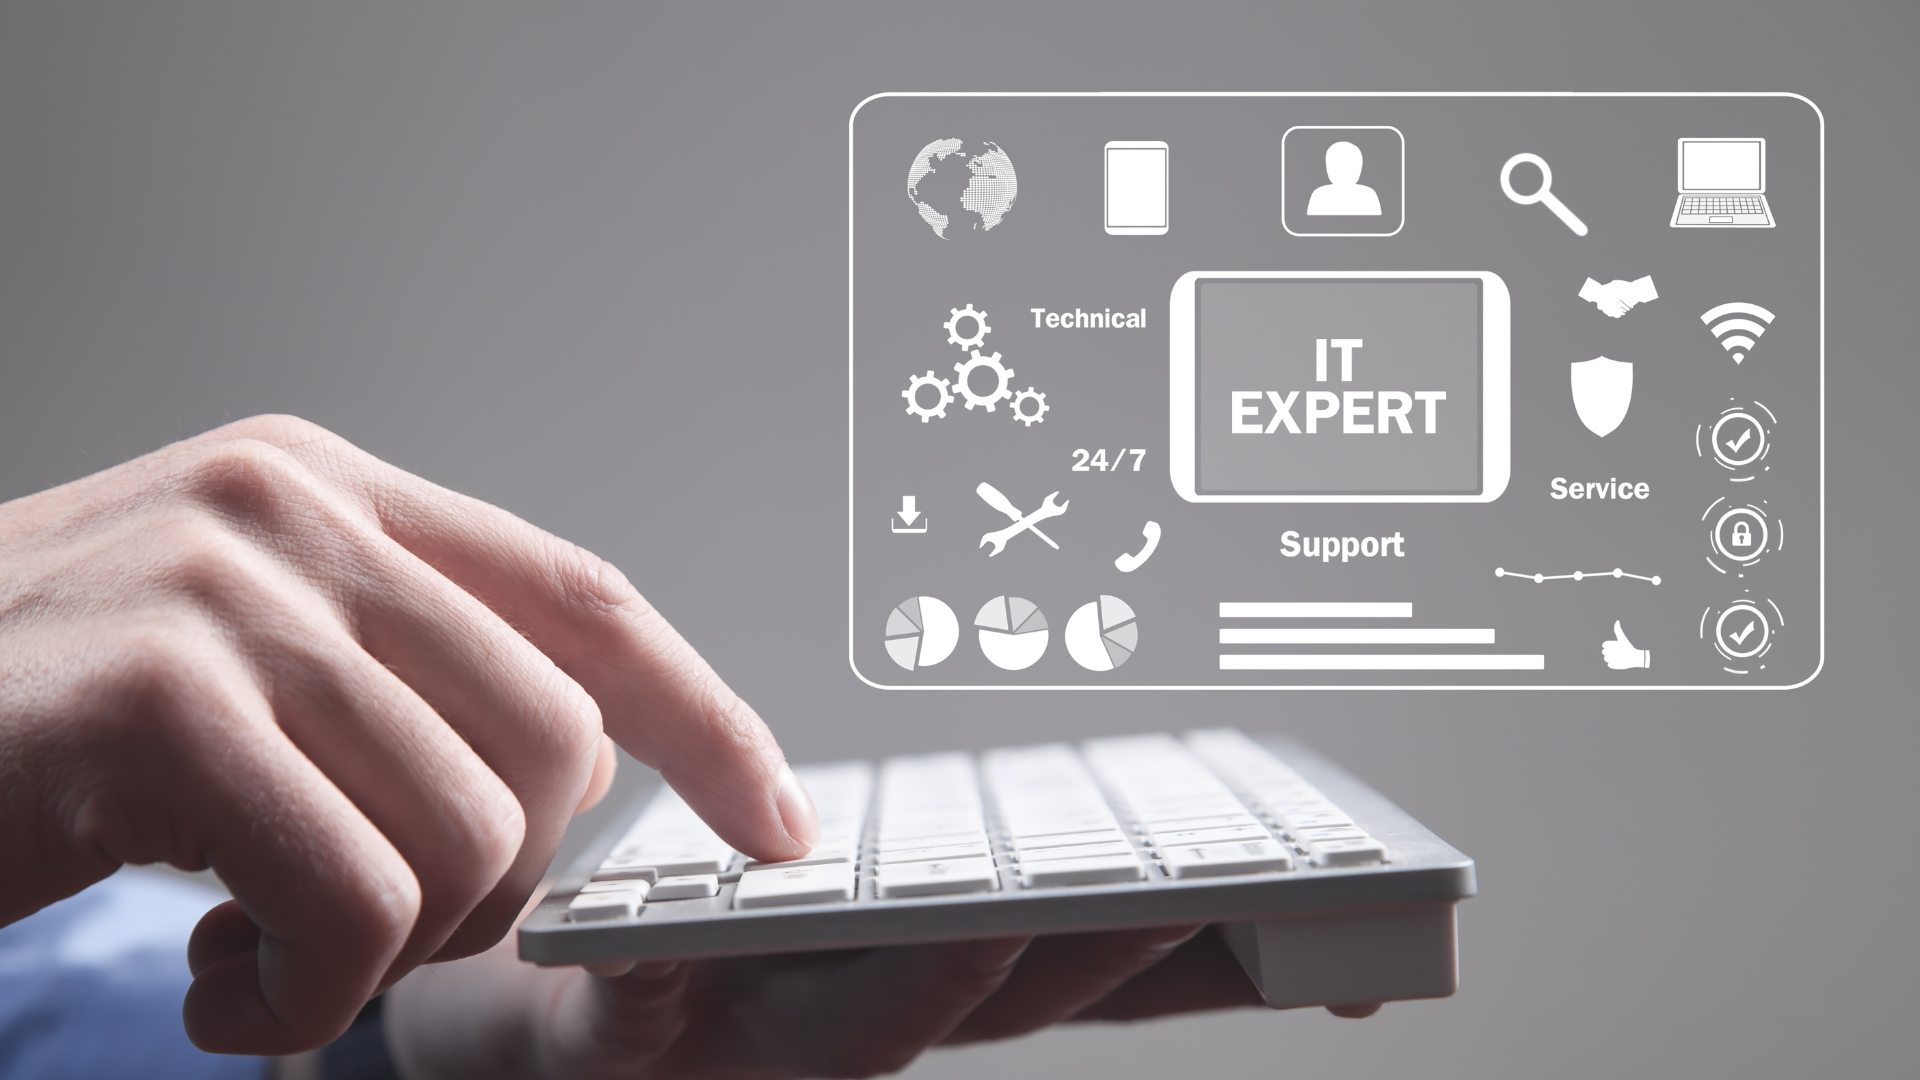 Business owner looks into the benefits of getting expert IT-managed services